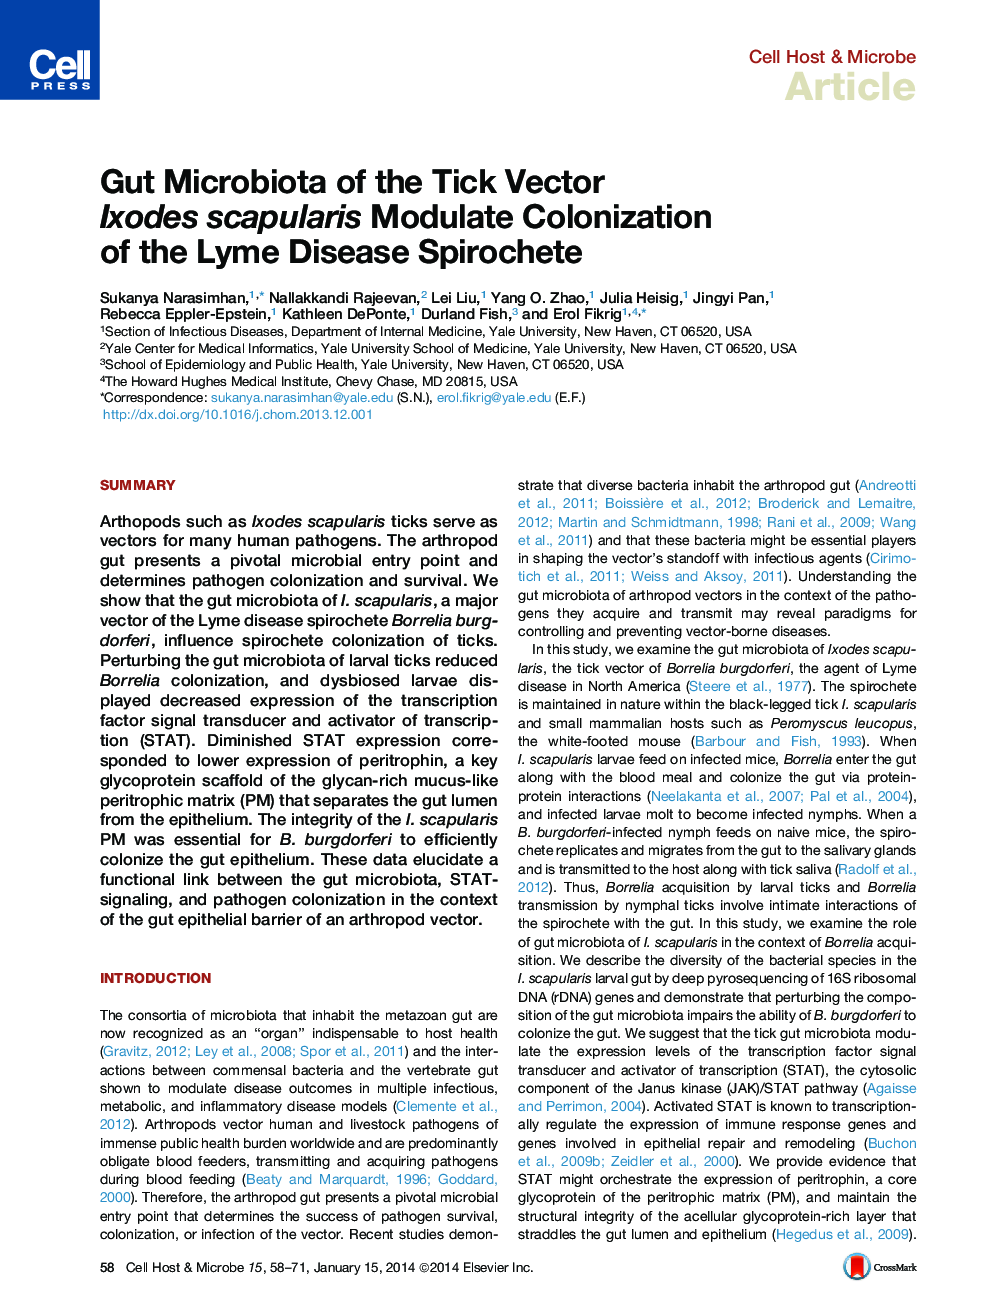 Gut Microbiota of the Tick Vector Ixodes scapularis Modulate Colonization of the Lyme Disease Spirochete